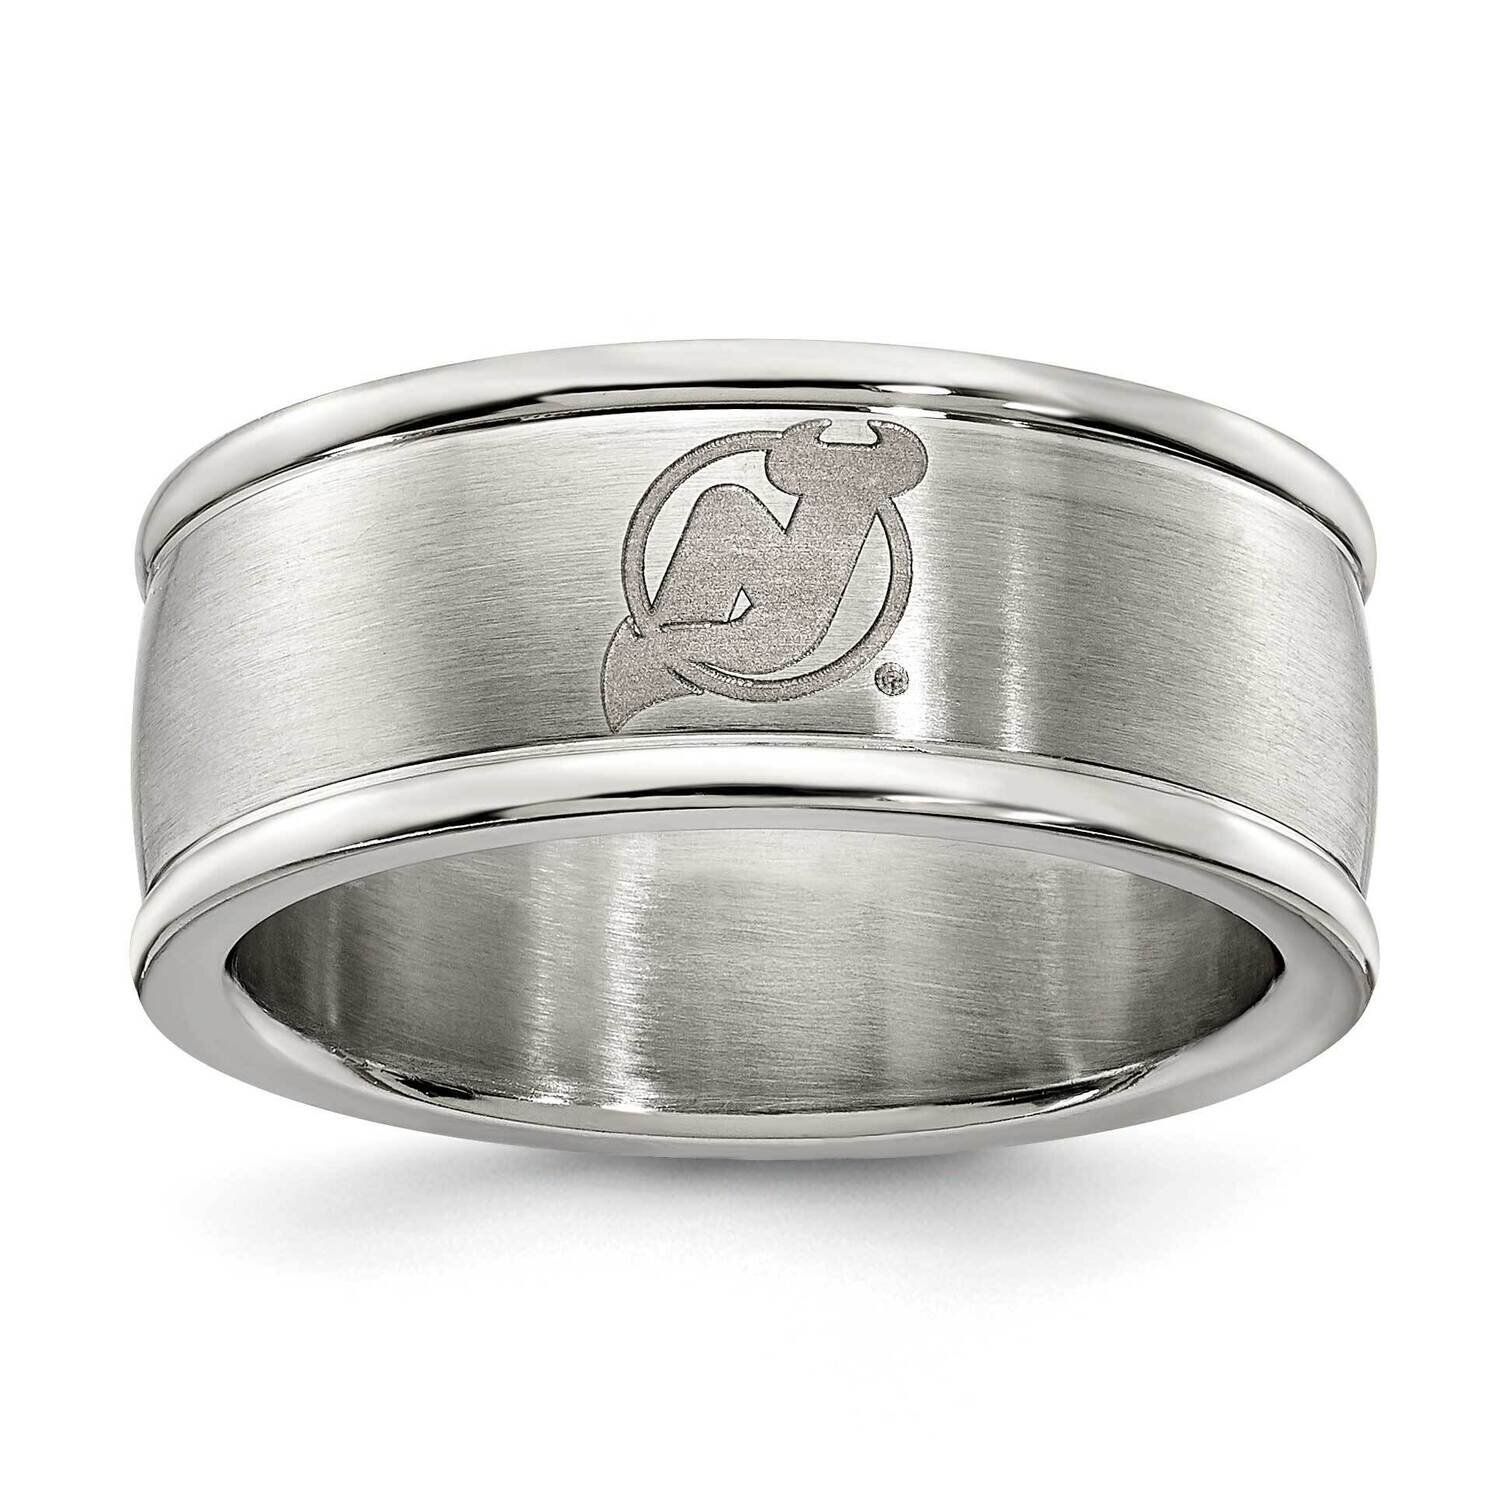 New Jersey Devils Logo Band Ring Stainless Steel DVL035-SZ6 Size 6